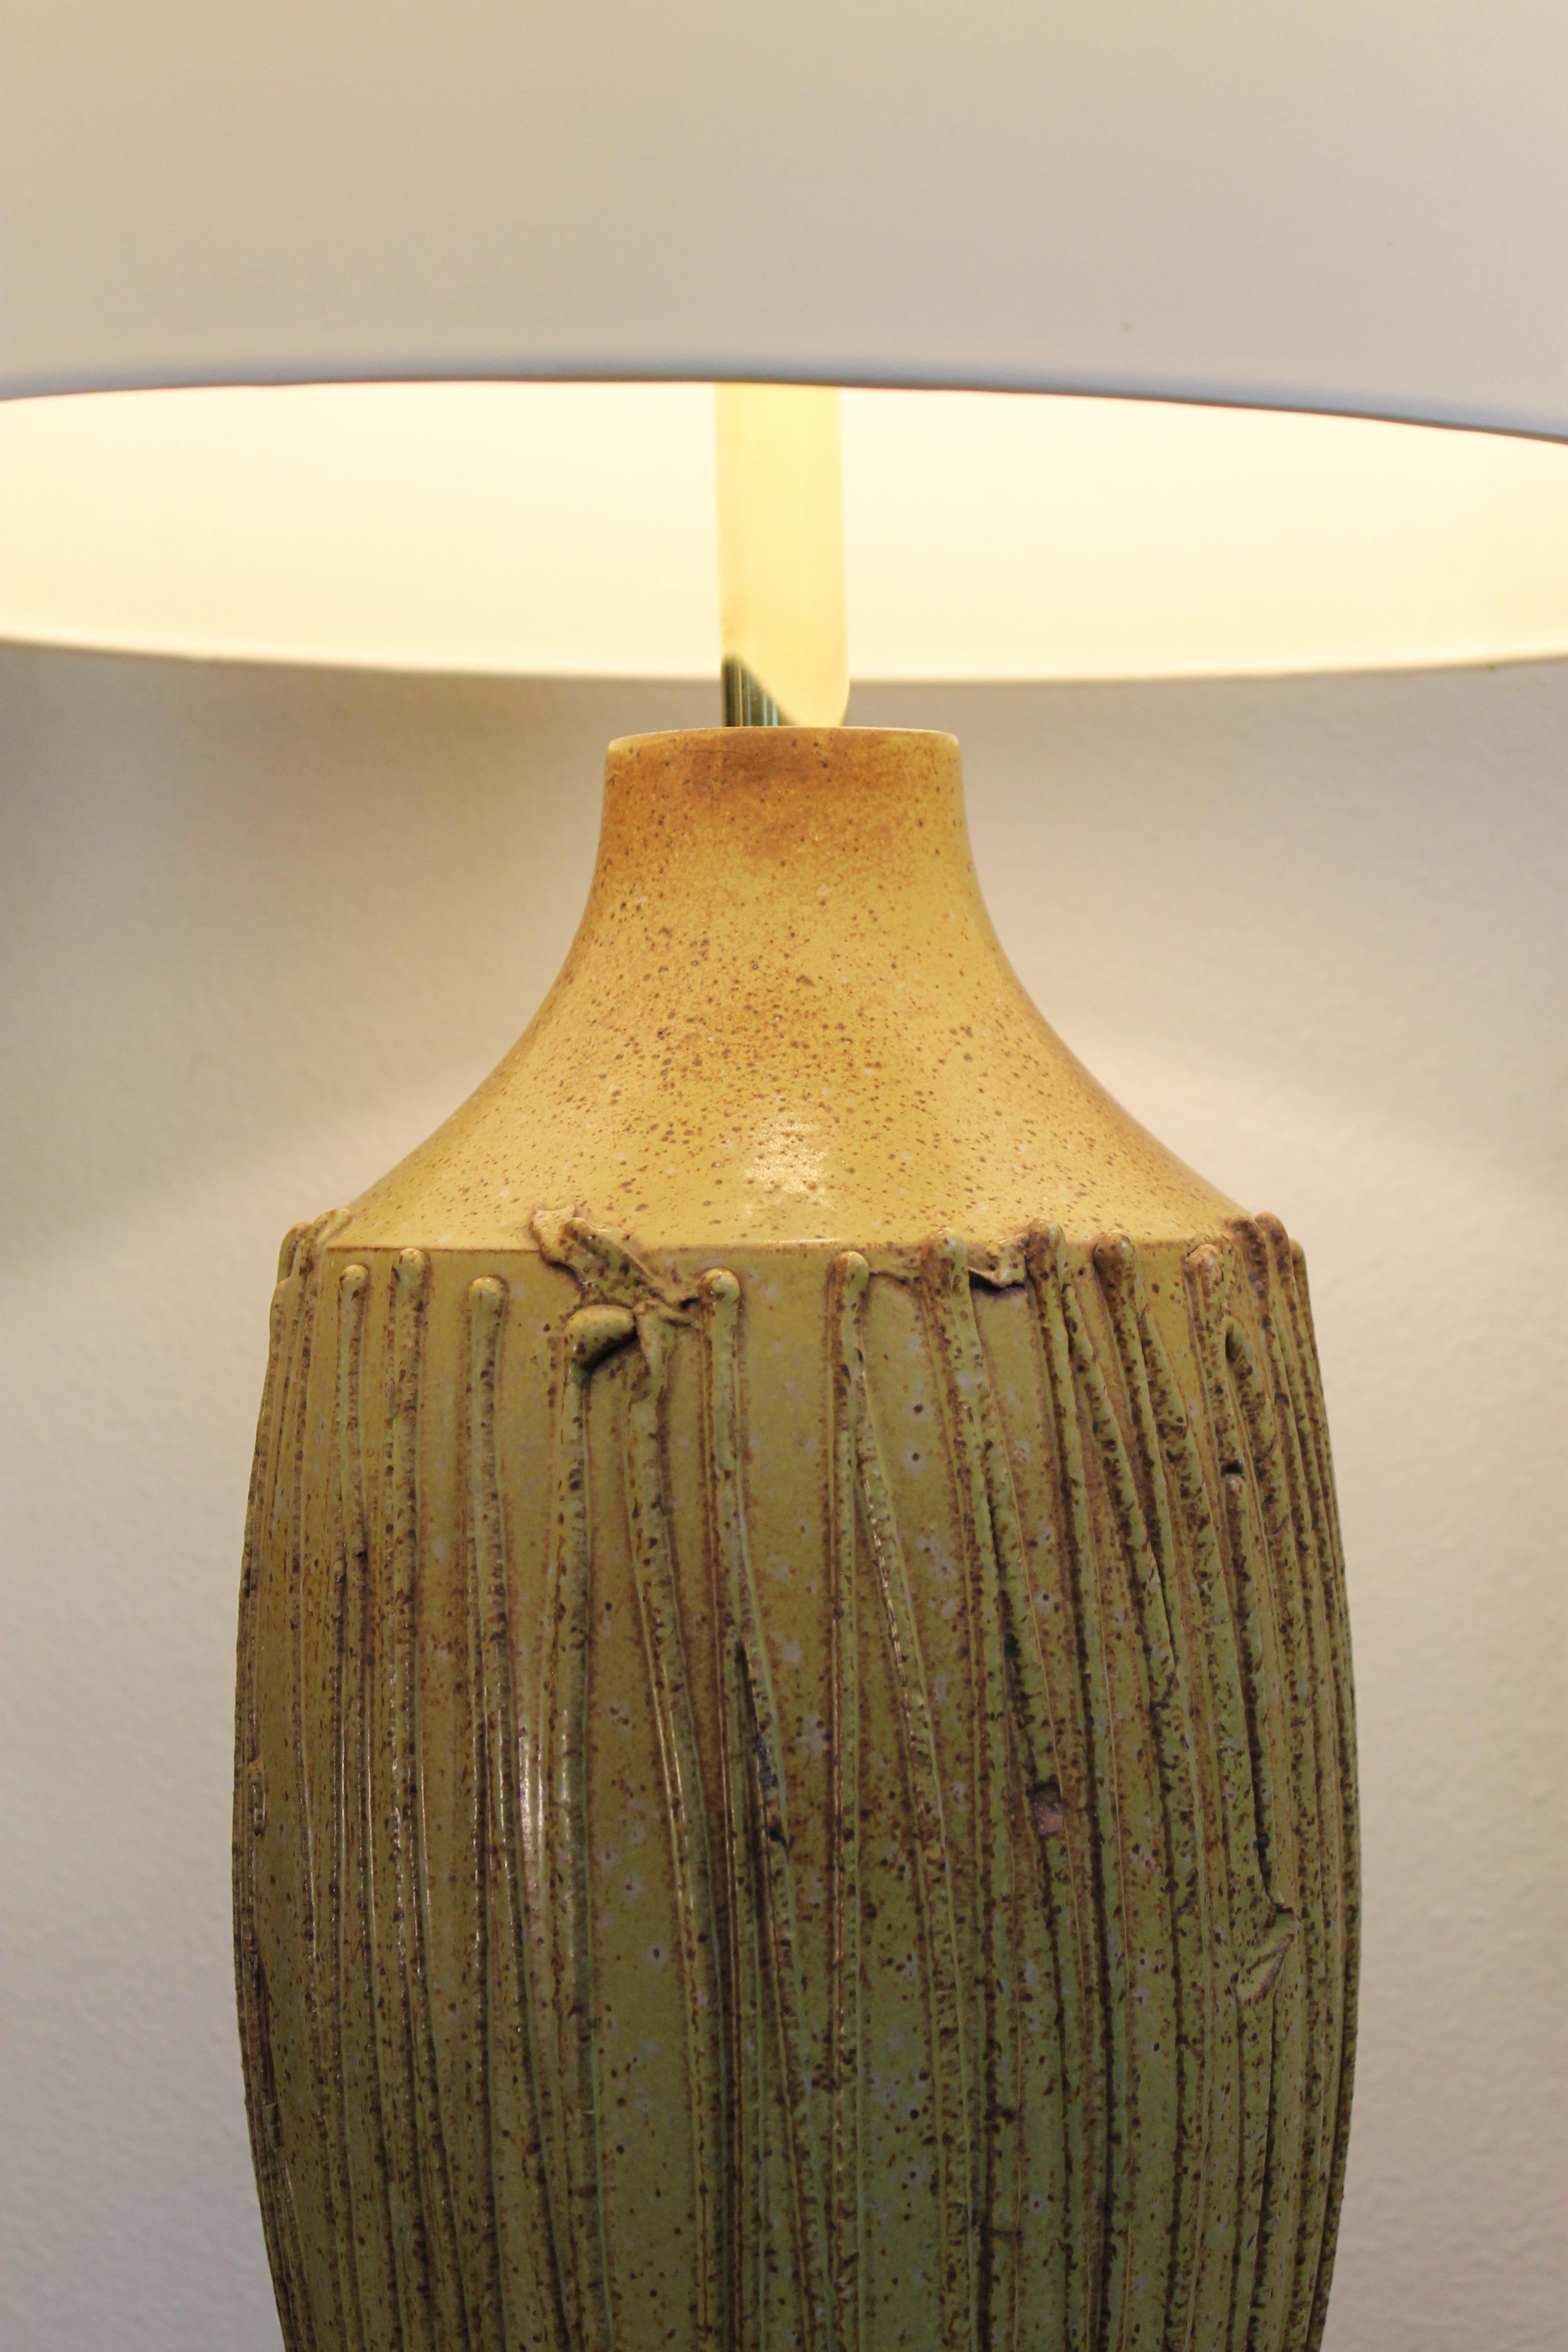 Pottery lamp by David Cressey in a mustard, brown color. Lamp measures 21